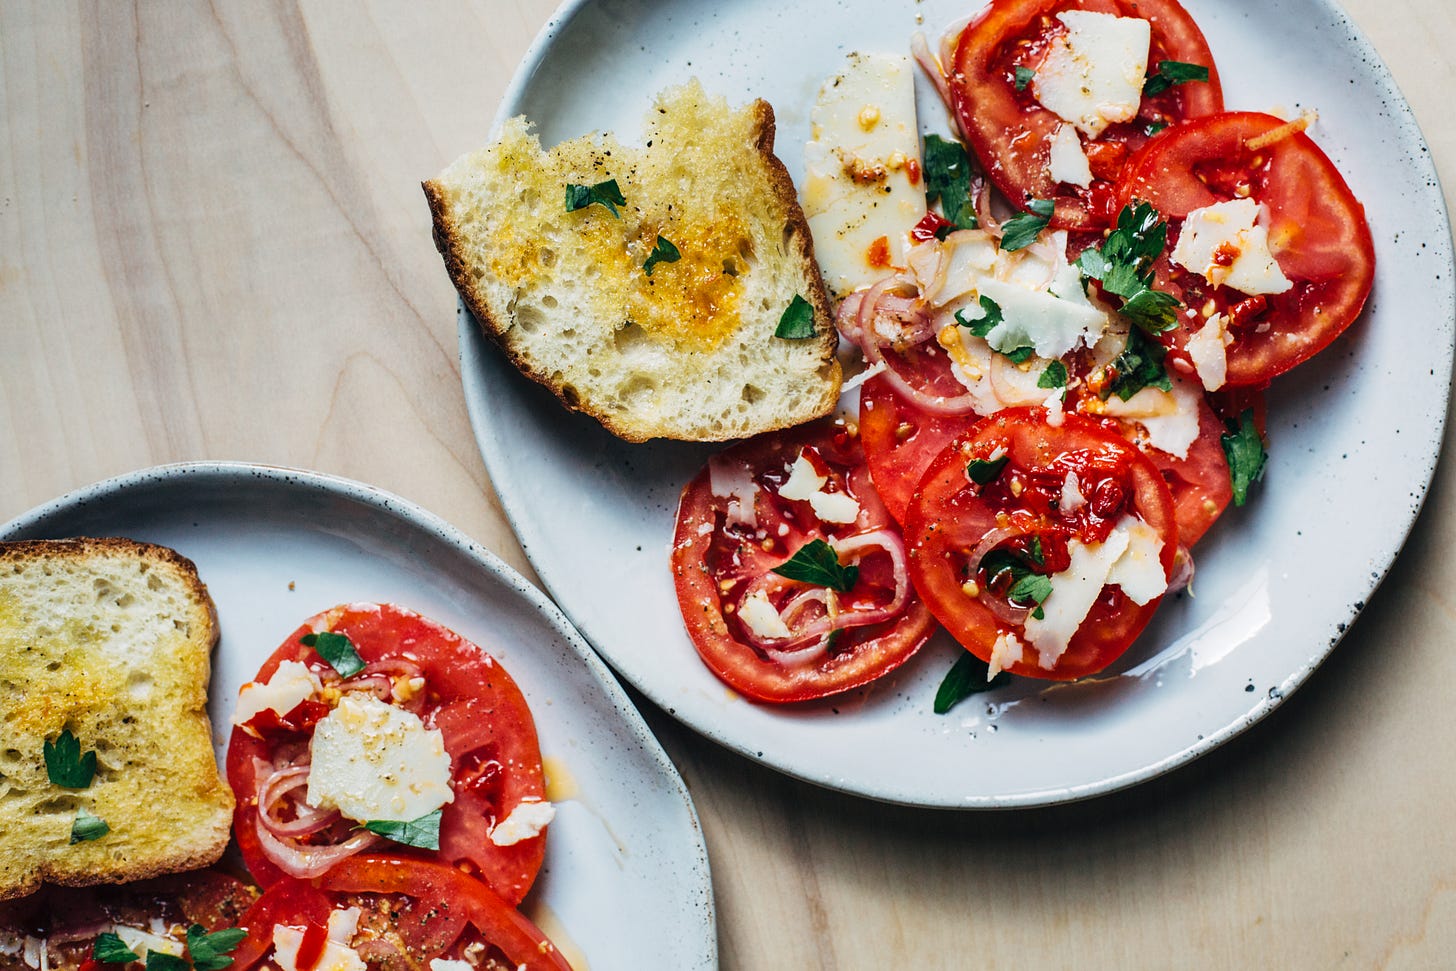 Two plates with tomato salad. The salad is topped with crumbled cheese and herbs, with a slice of bread on the side. 